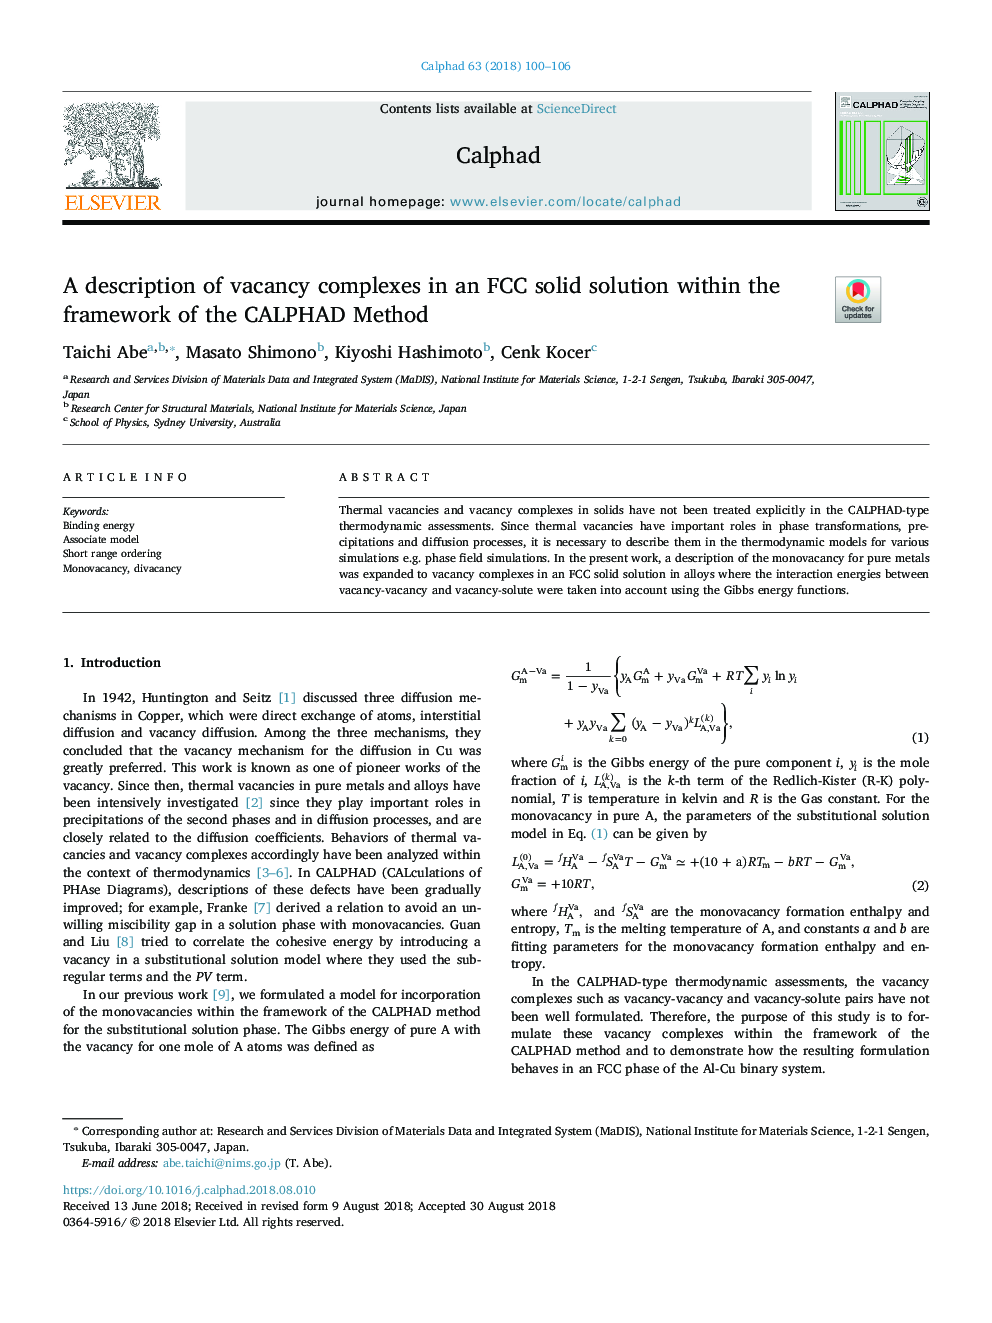 A description of vacancy complexes in an FCC solid solution within the framework of the CALPHAD Method